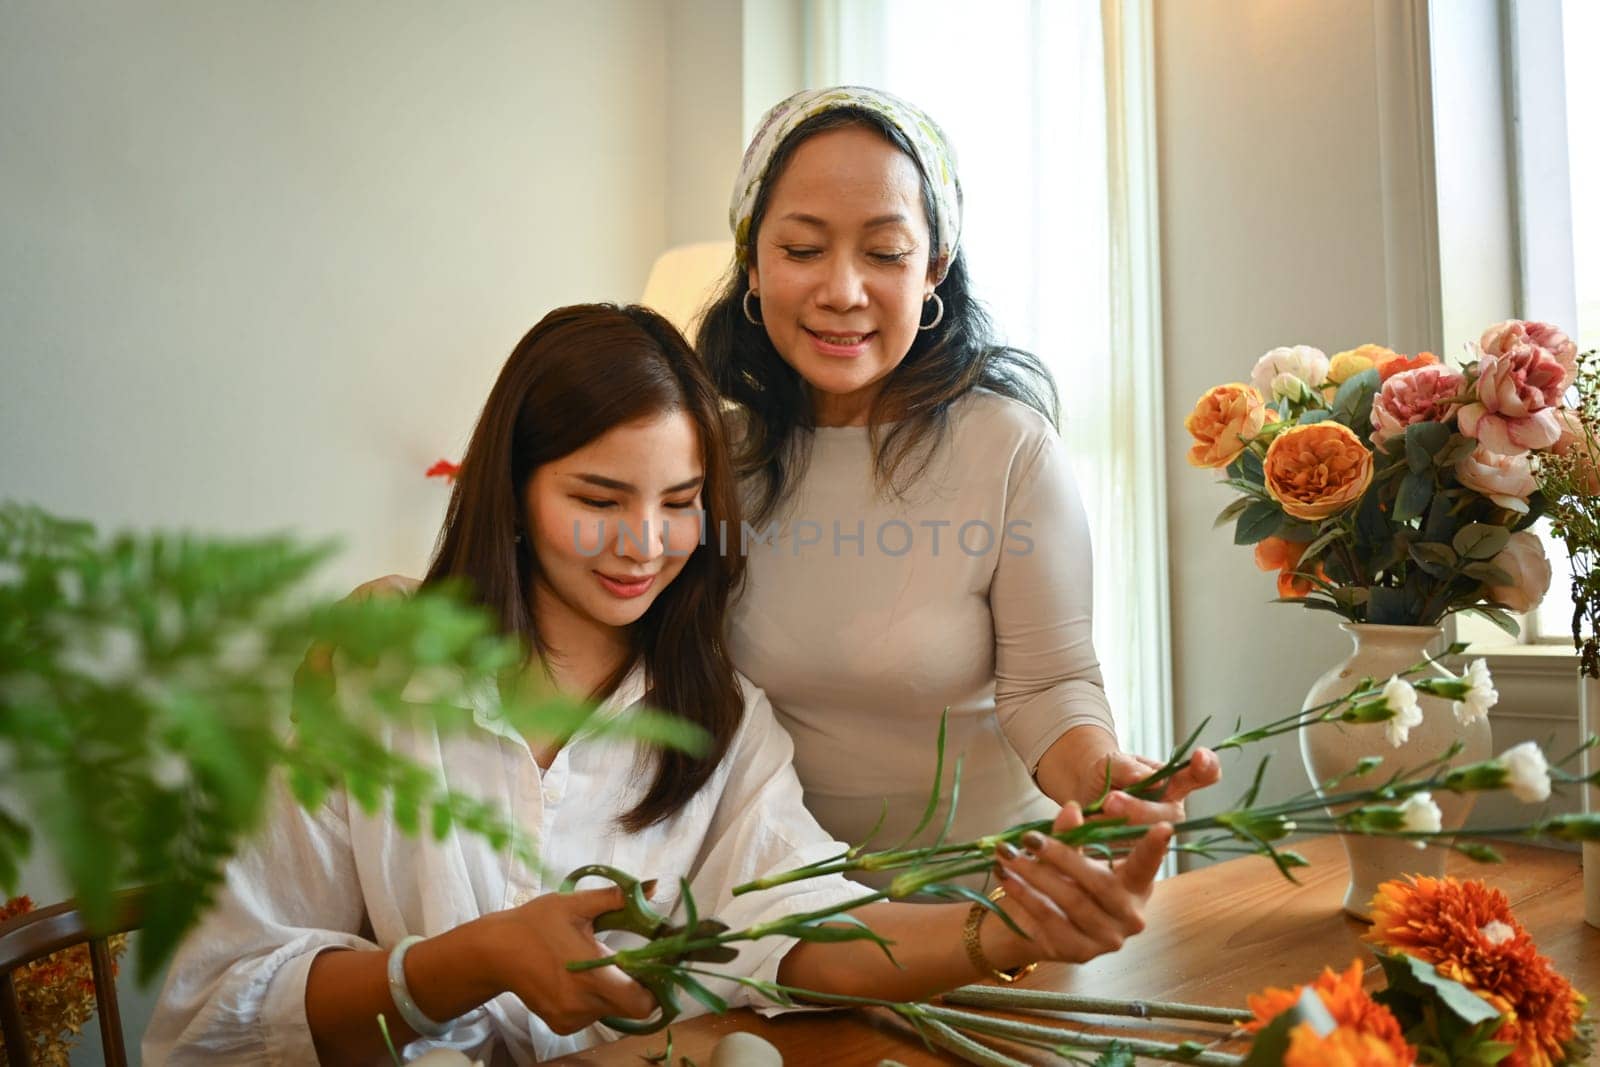 Family and leisure activity concept. Shot of senior woman and adult daughter creating beautiful bouquet in living room.